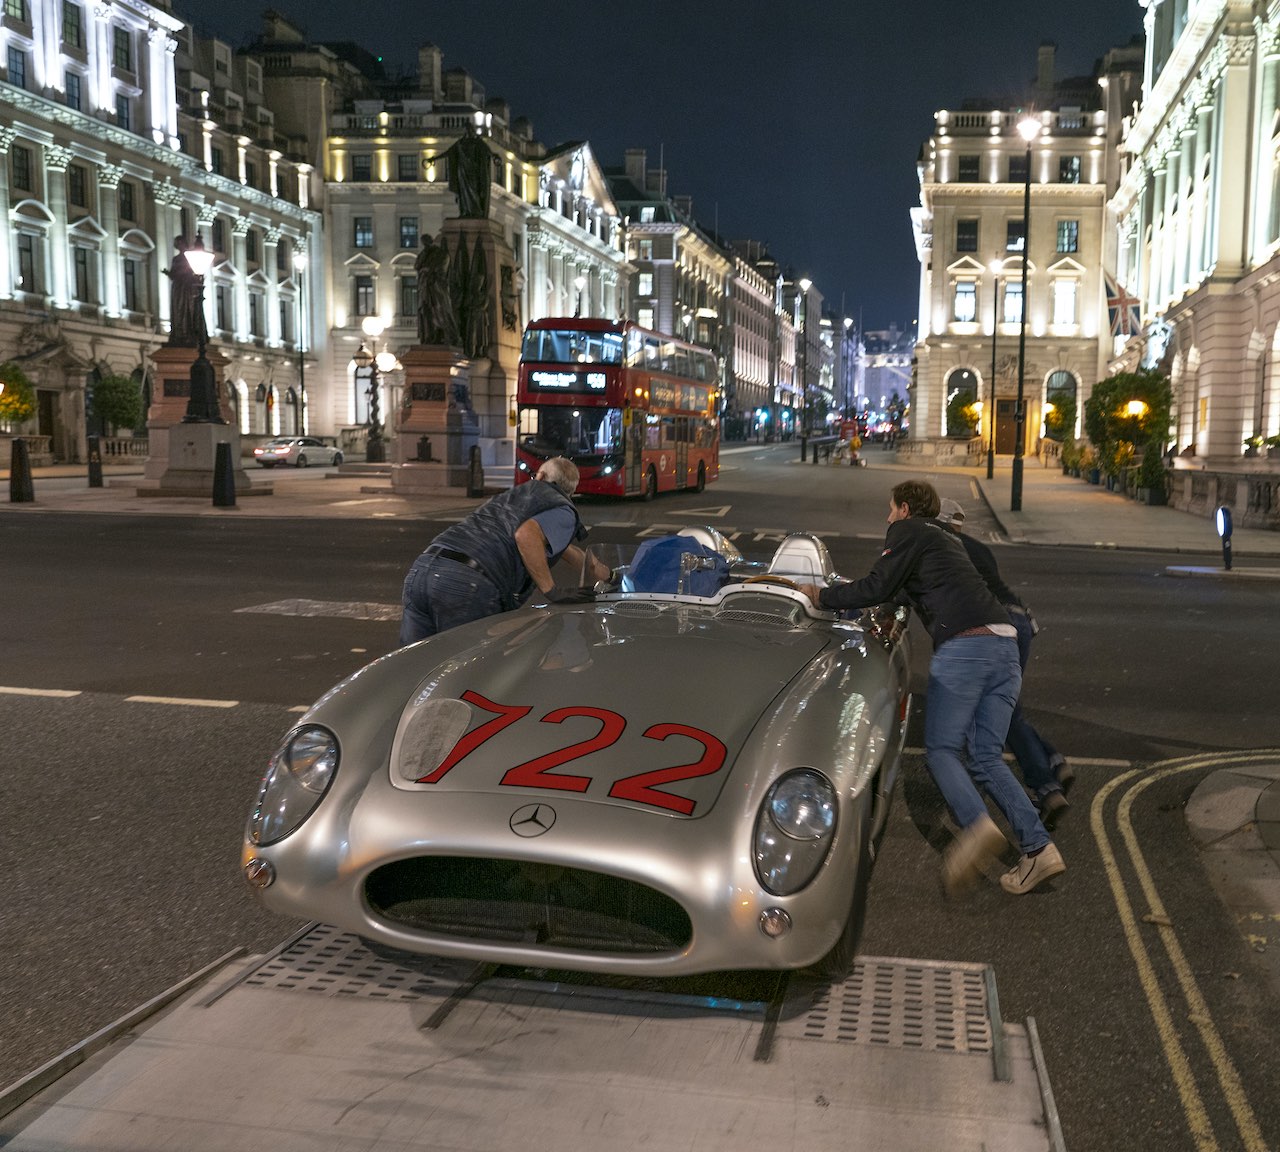 Stirling Moss's Mercedes-Benz 300 SLR in final drive through London